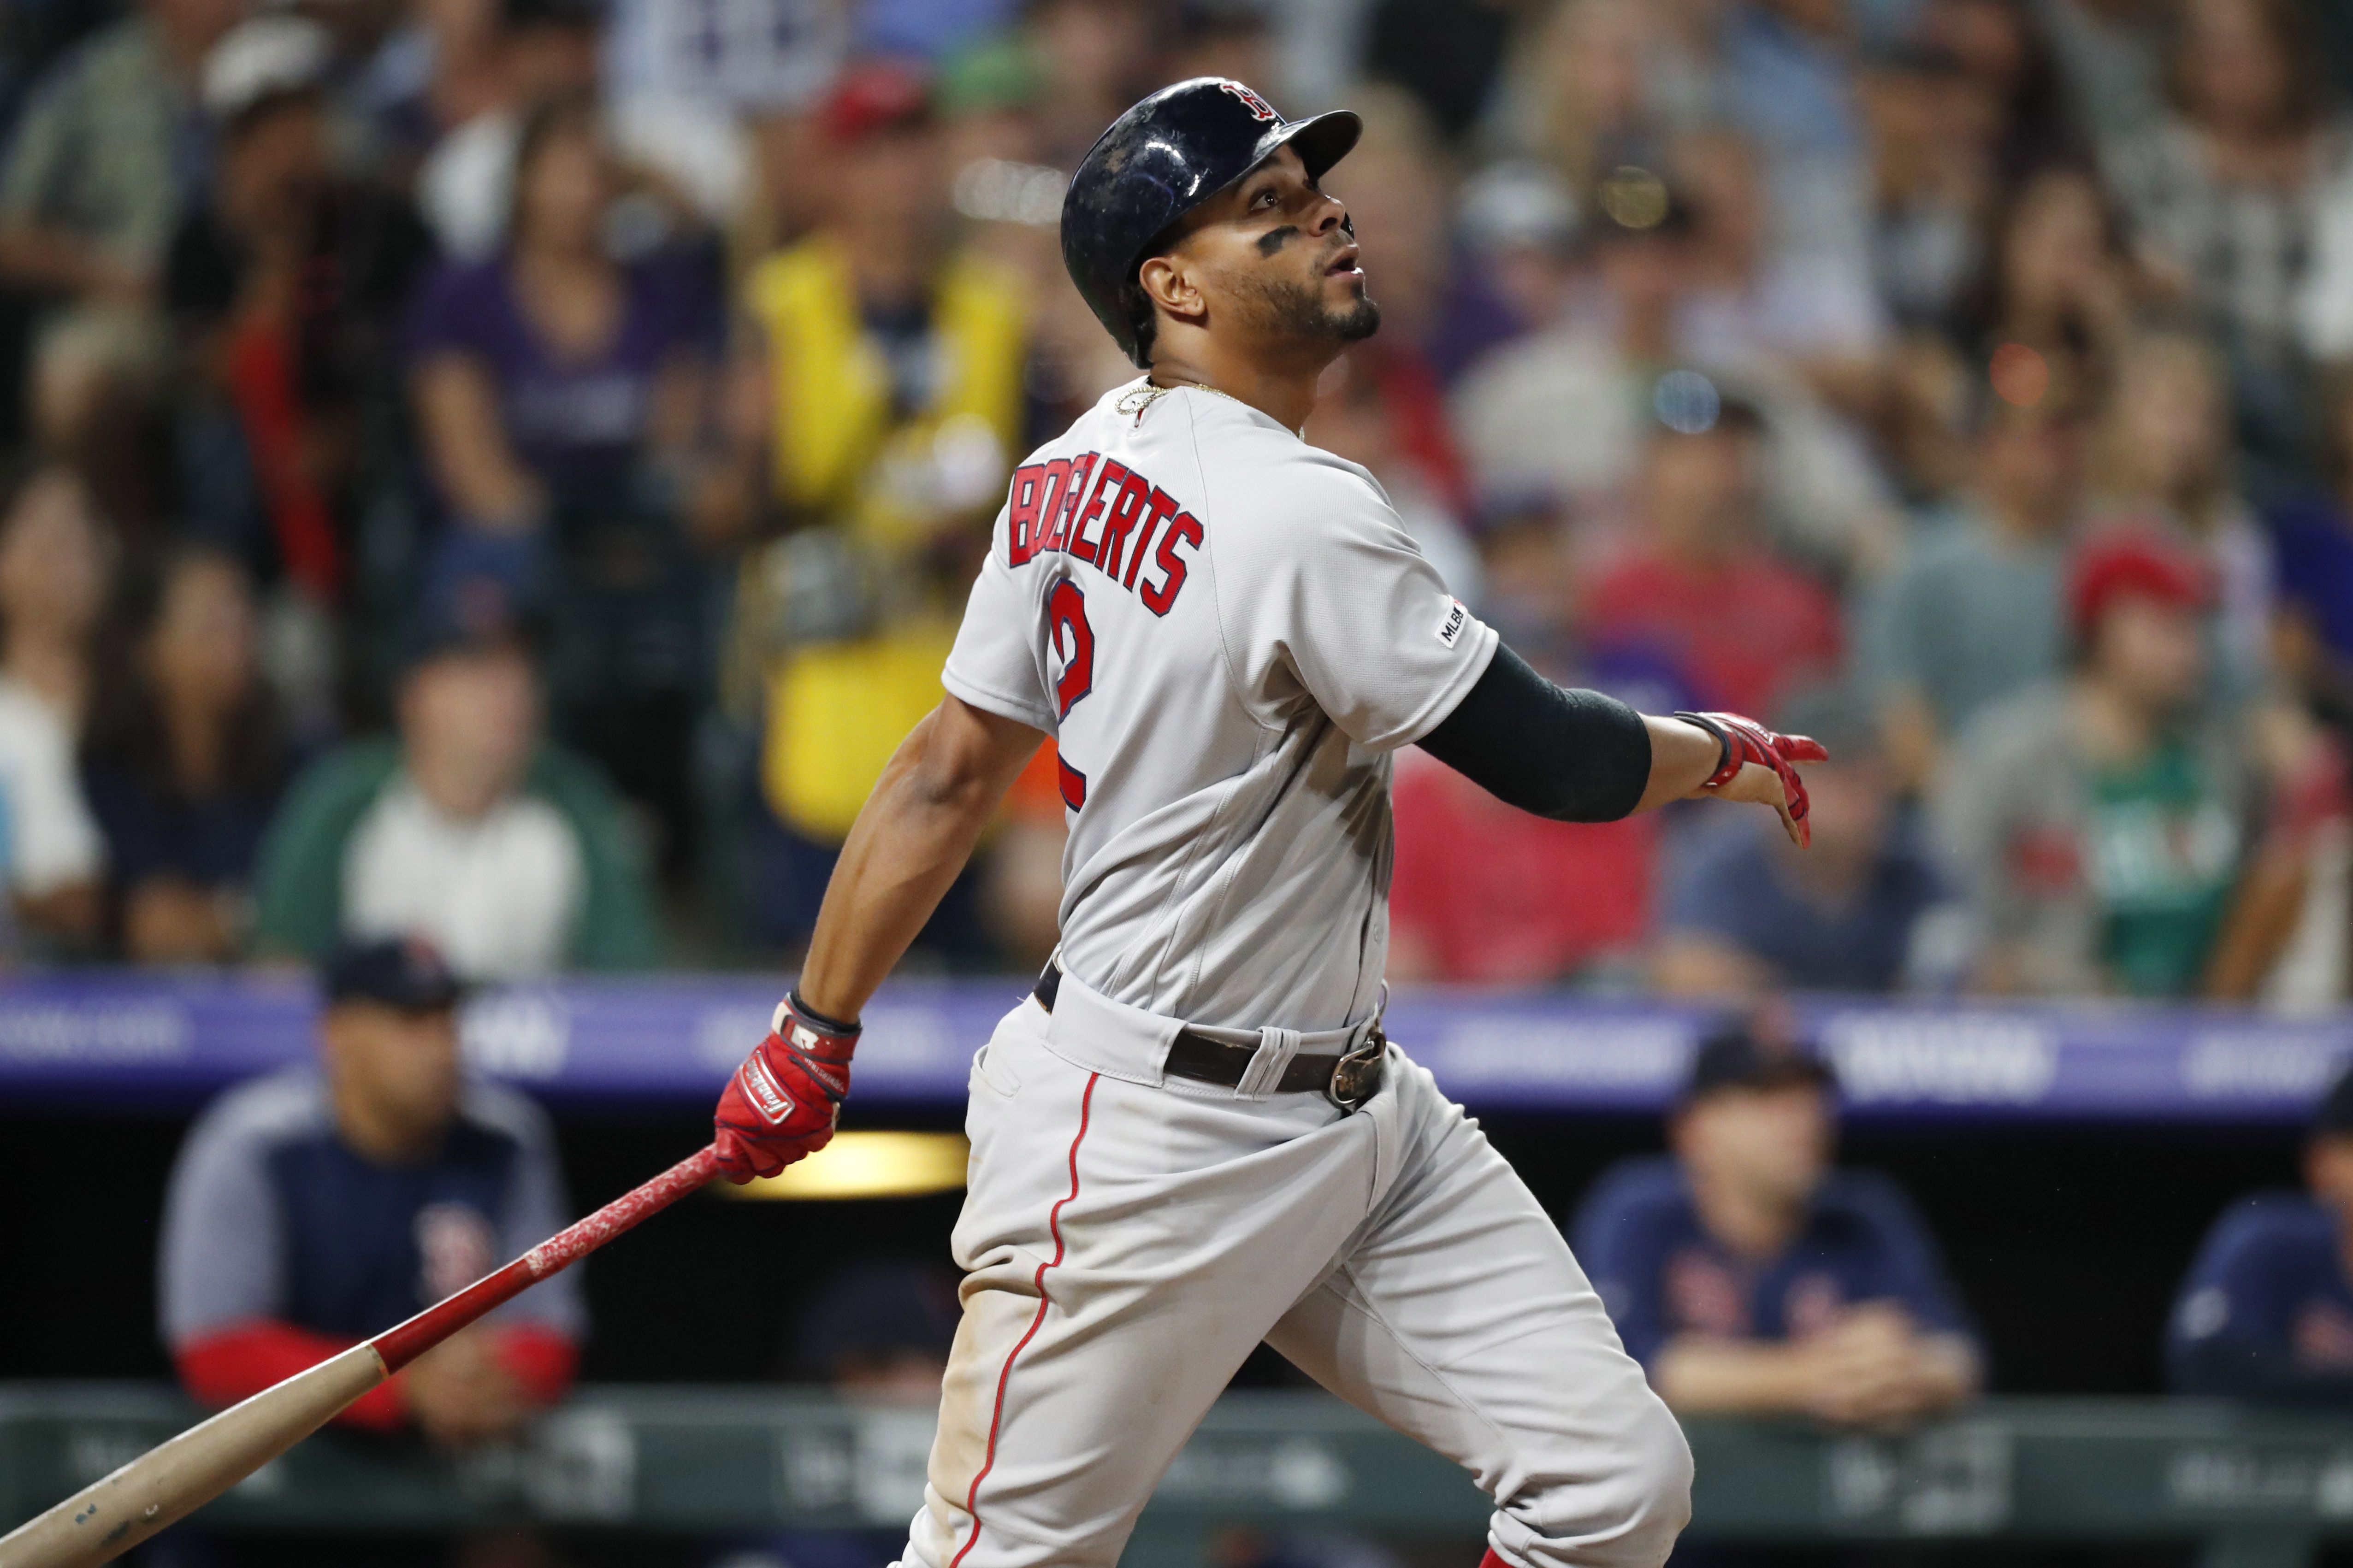 With Xander Bogaerts leading the way, Red Sox gain ground in wild